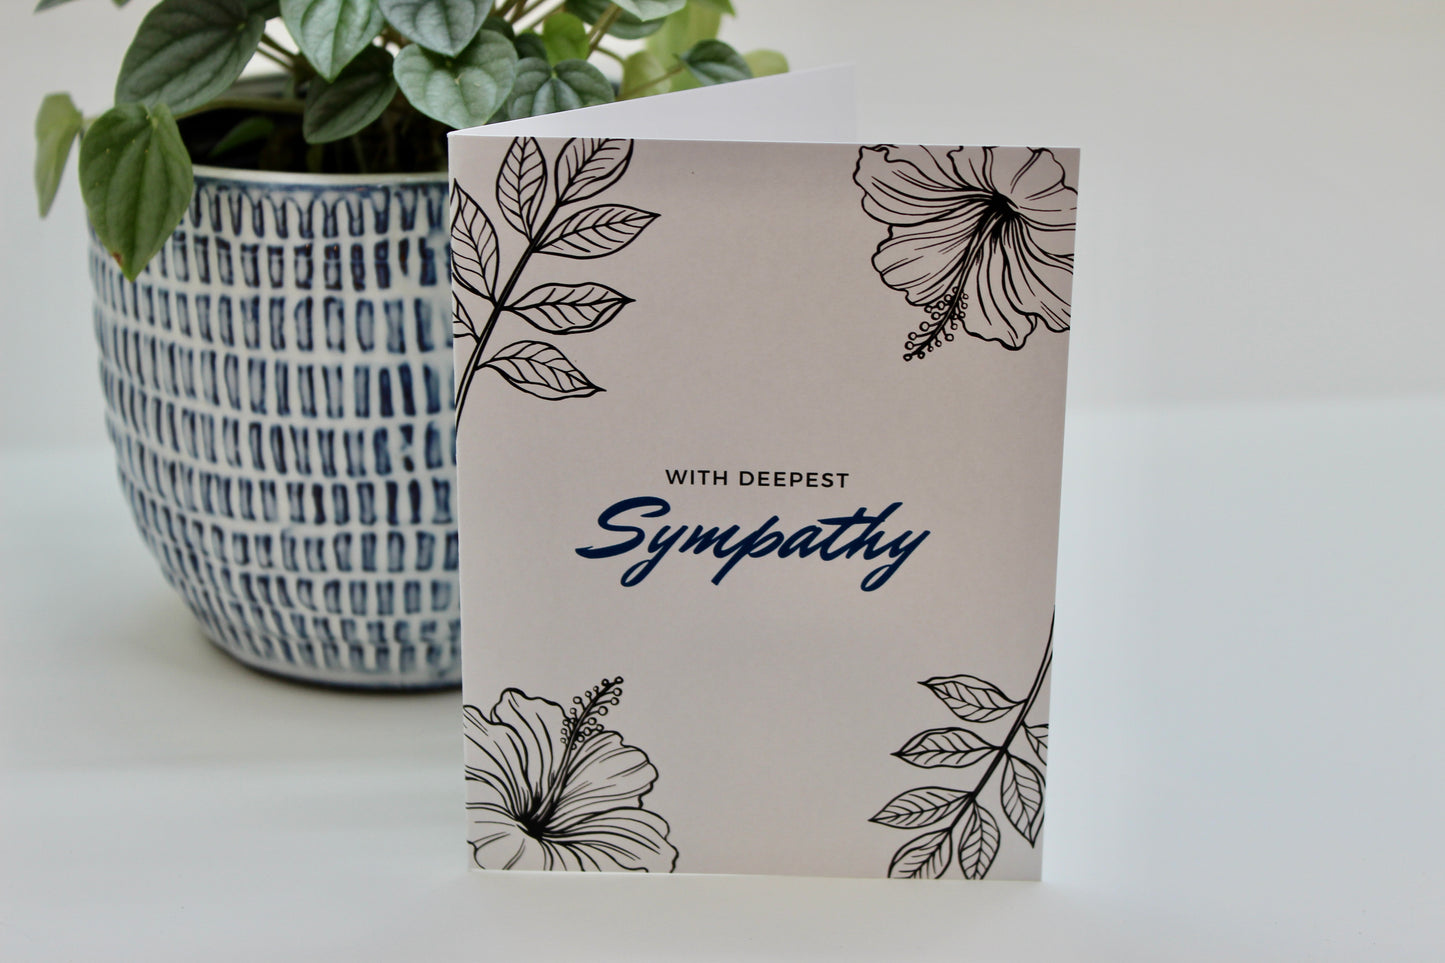 Sympathy Flowers and Leaves Card